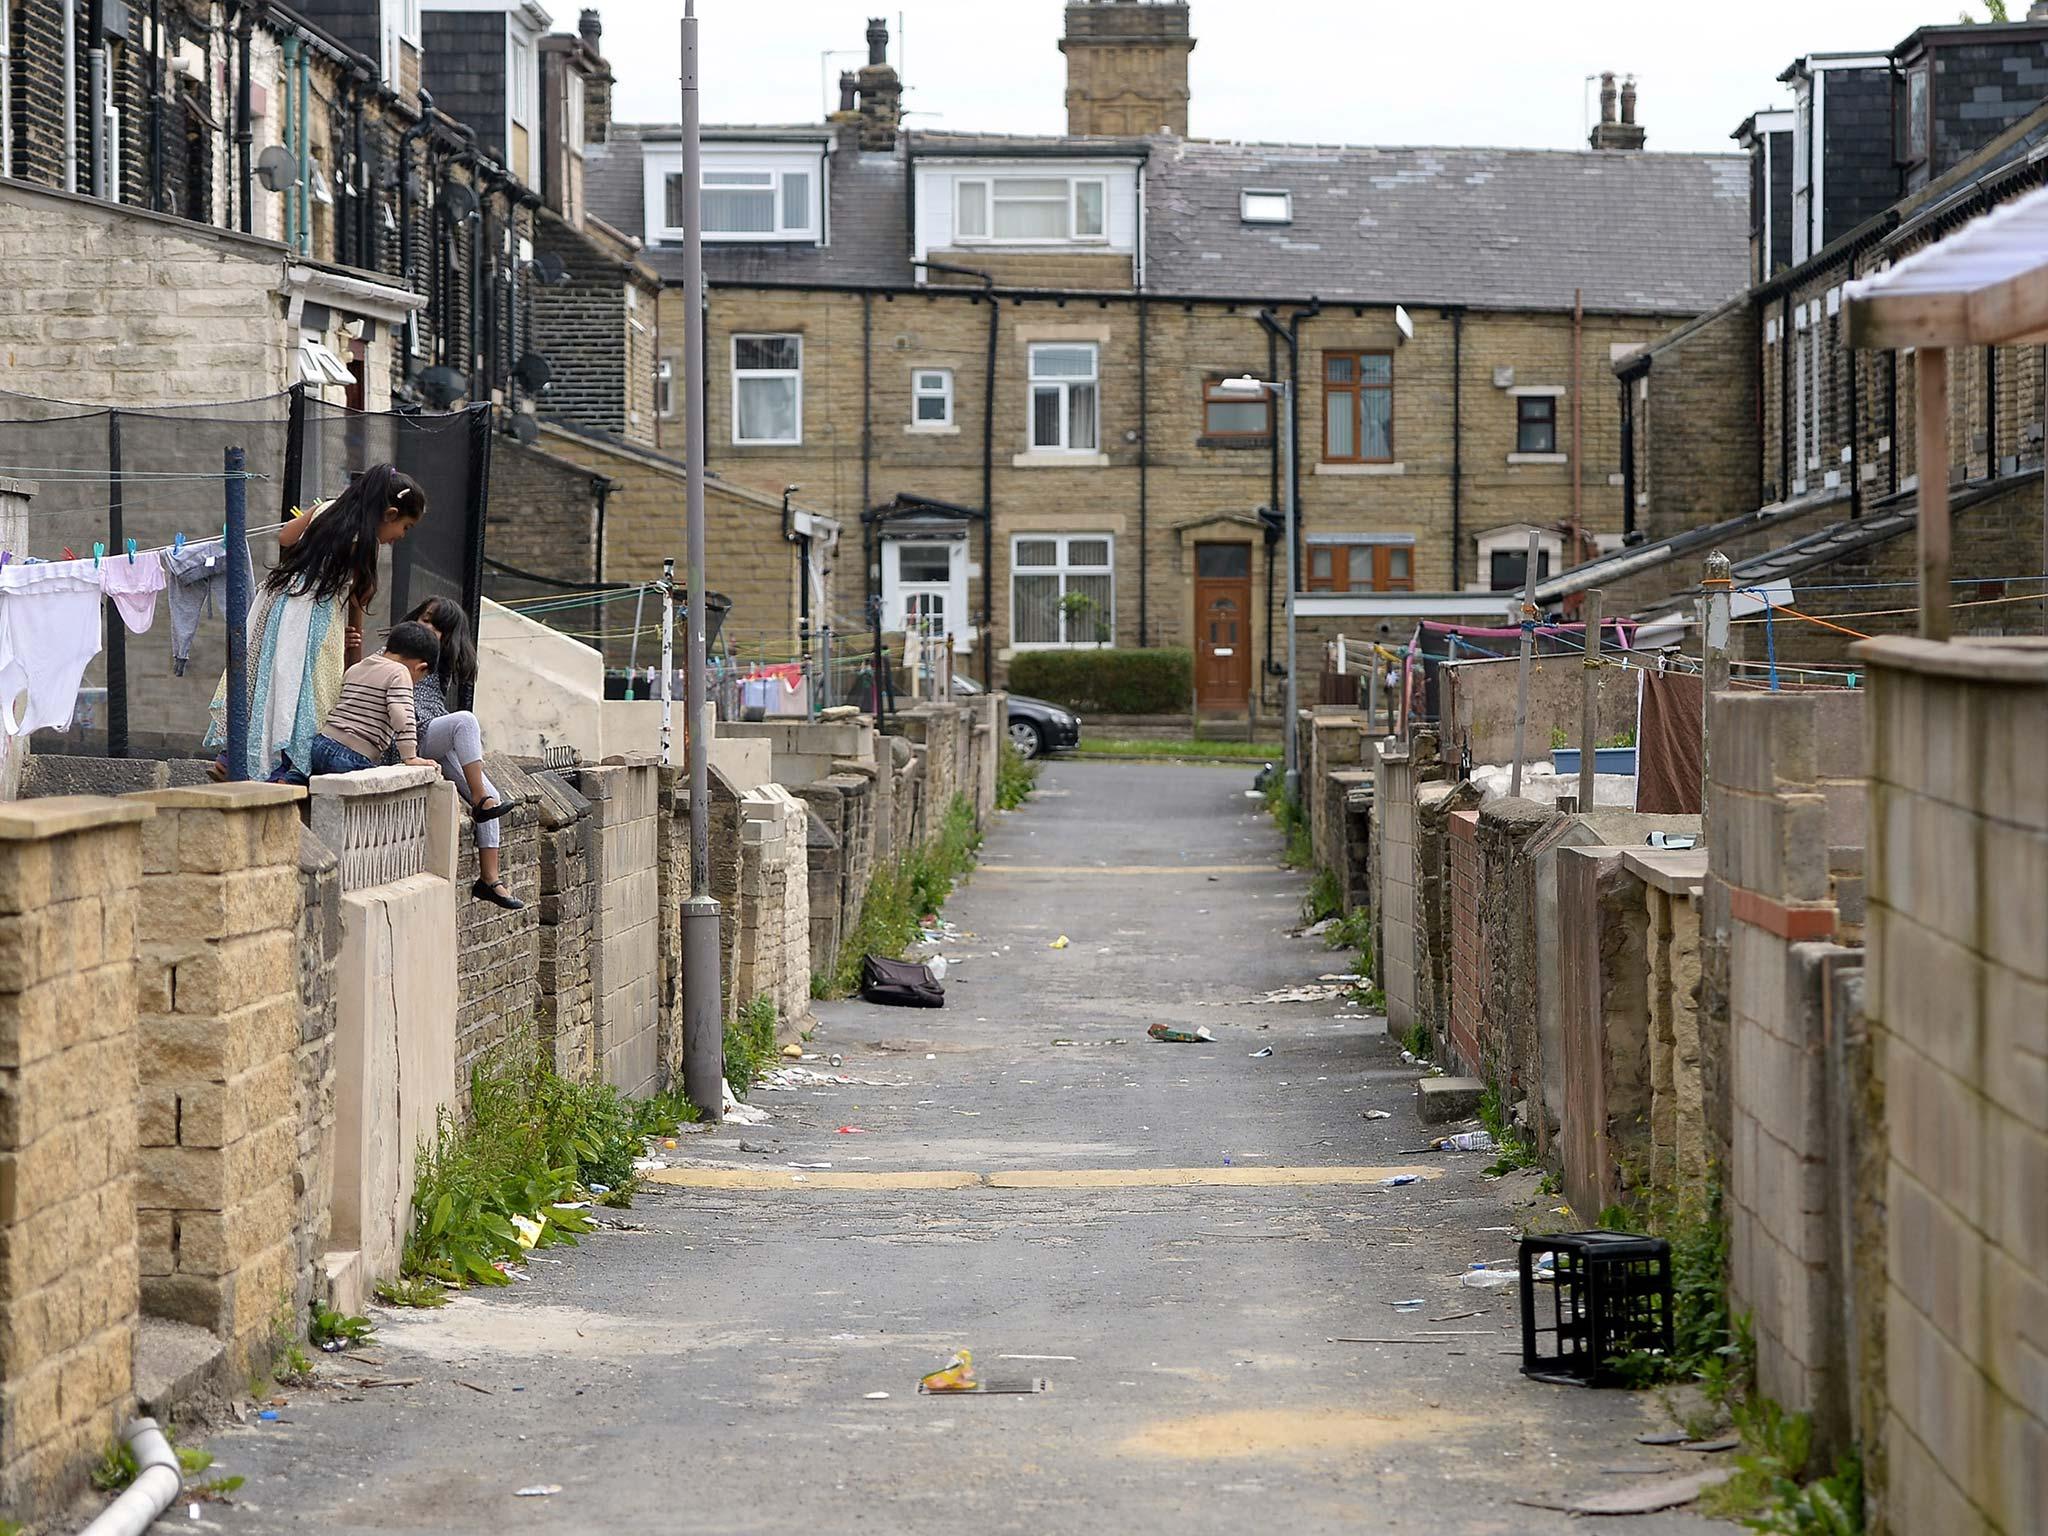 Bradford is the 19th most deprived local authority in England and the second in Yorkshire and Humber